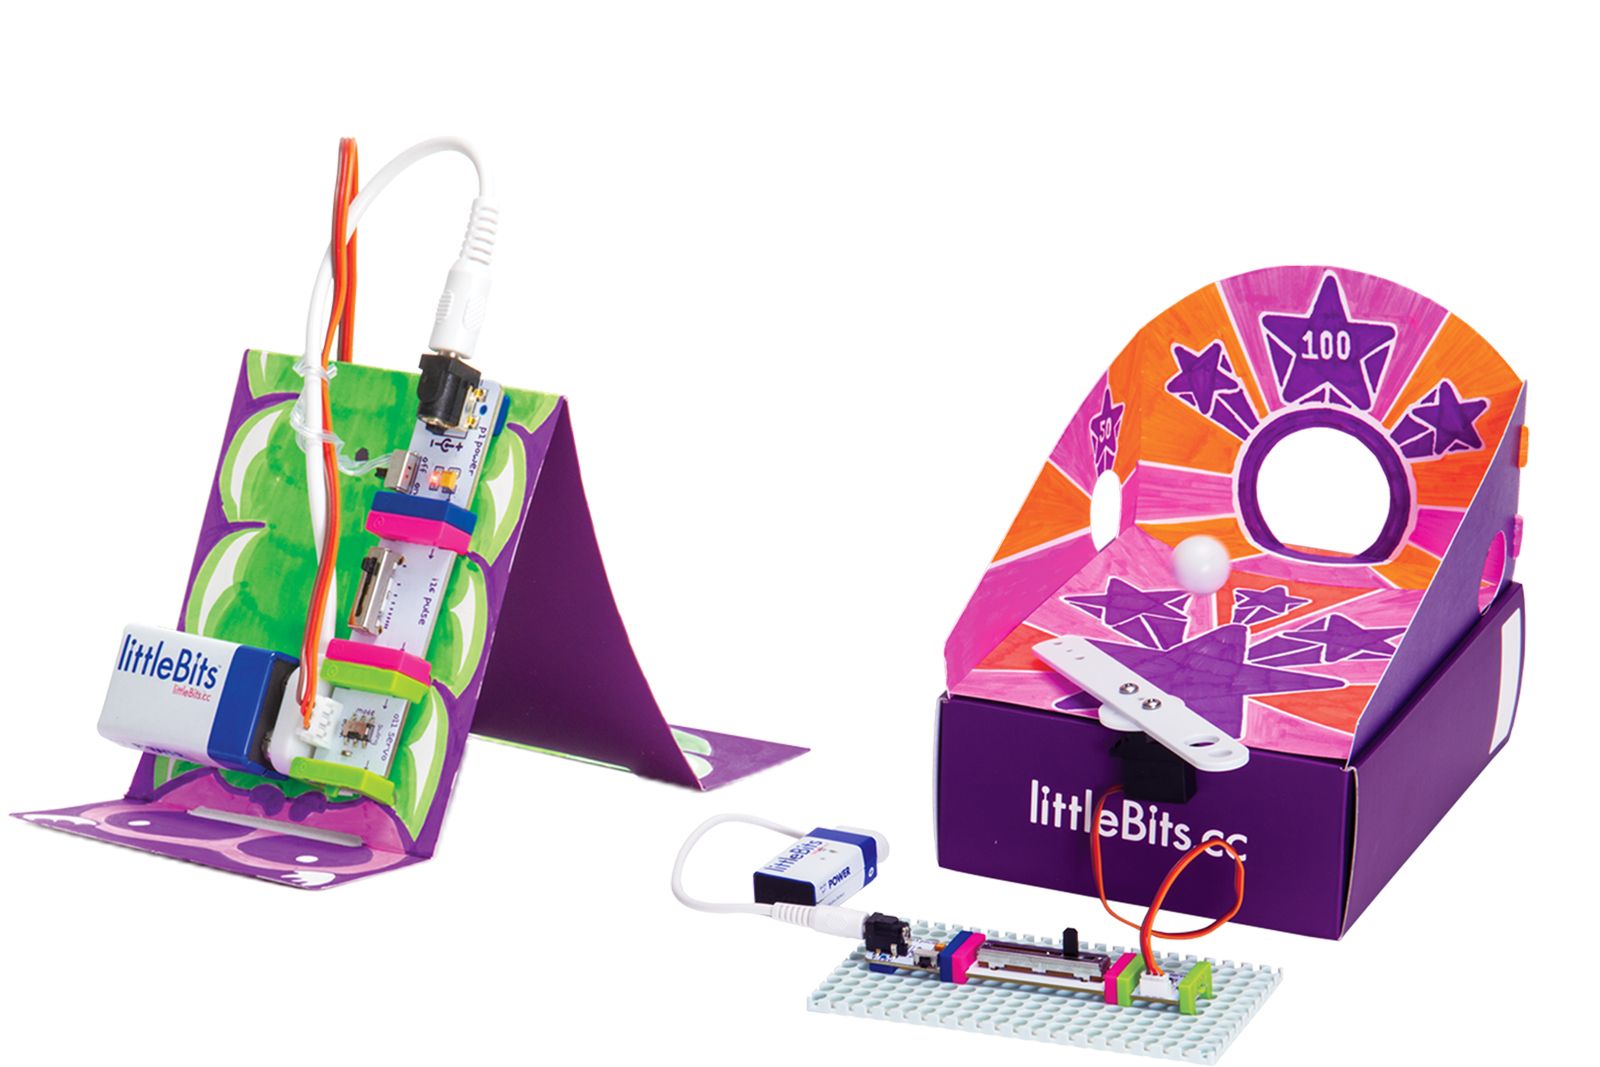 littleBits releases four new affordable inventor kits to get kids building image 1